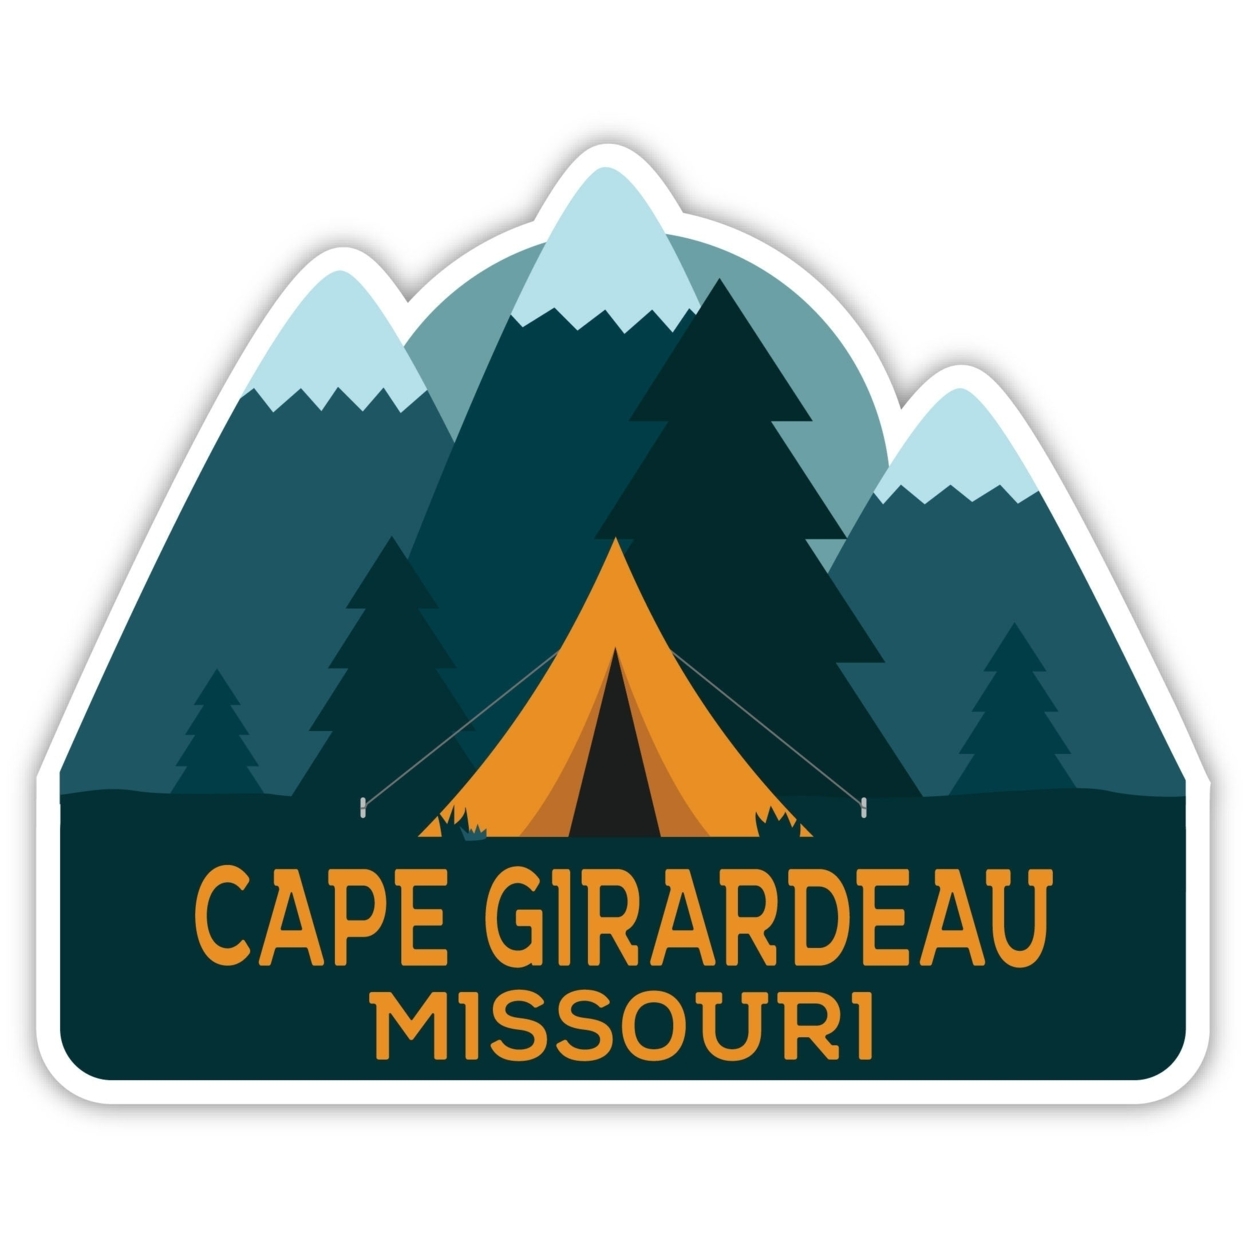 Cape Girardeau Missouri Souvenir Decorative Stickers (Choose Theme And Size) - 4-Pack, 6-Inch, Great Outdoors